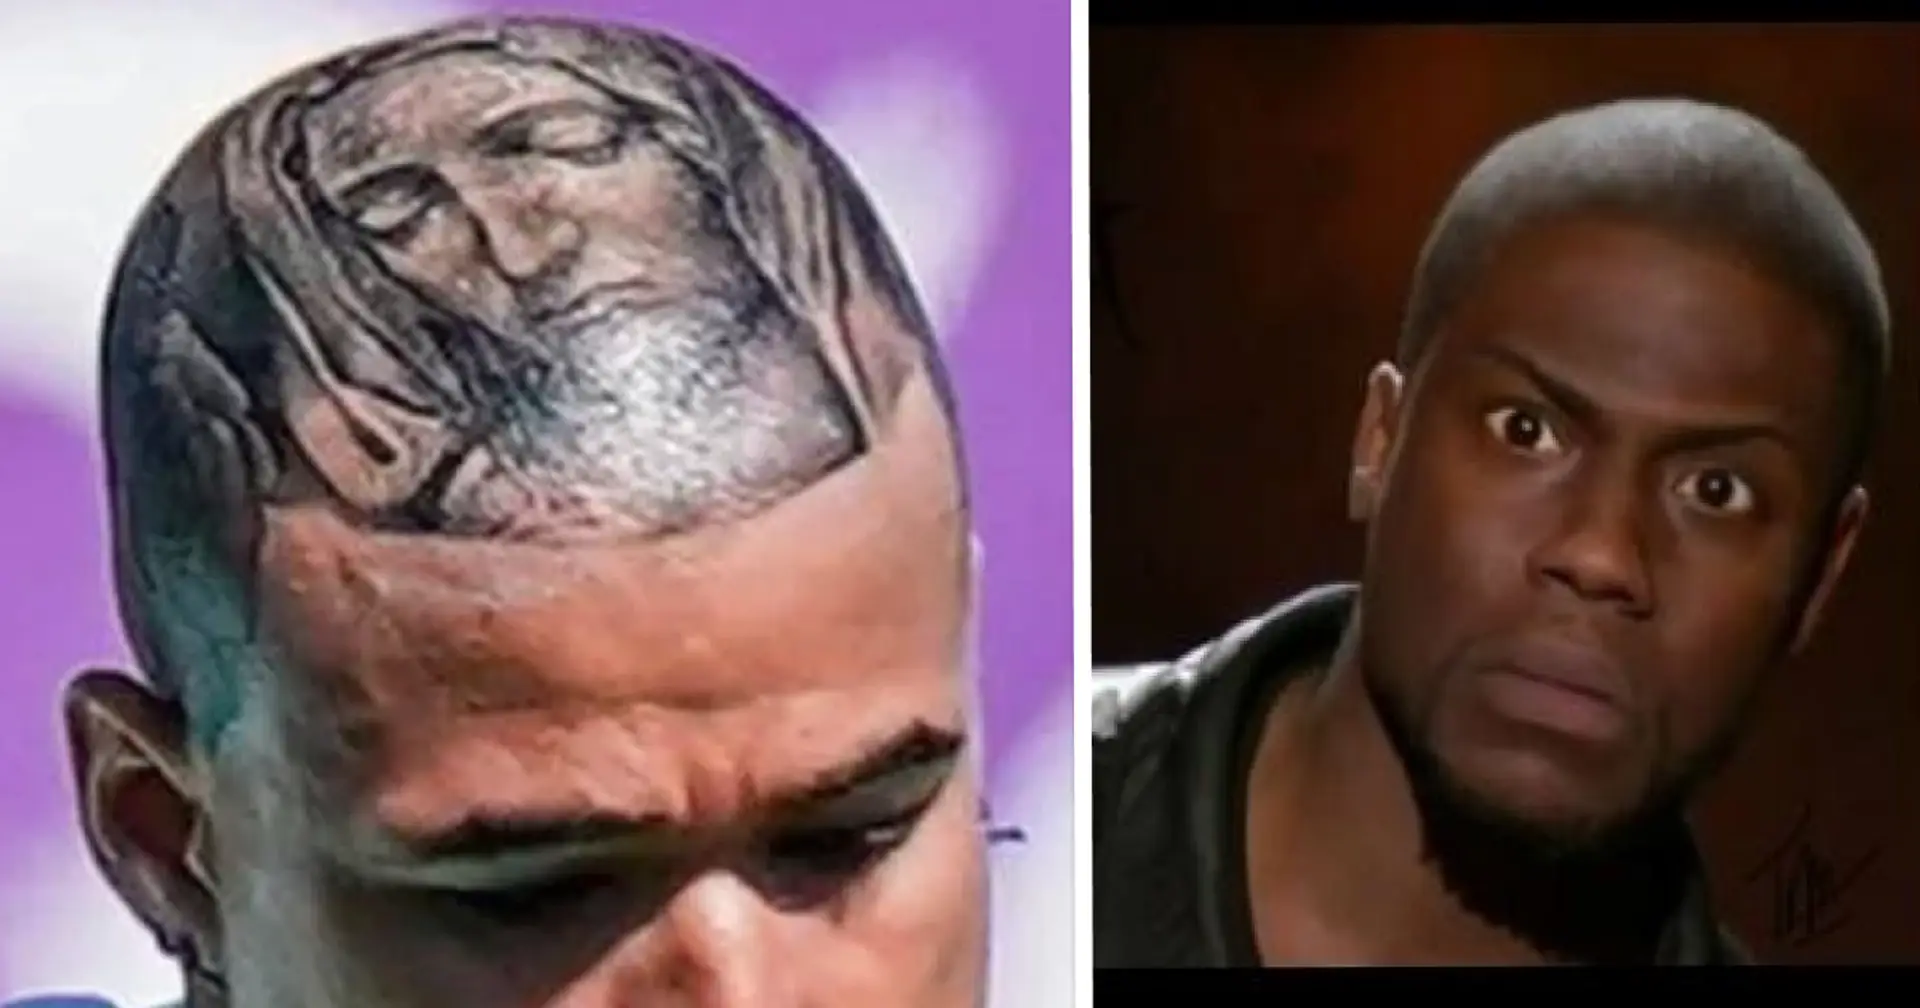 Ex-Chelsea player draws weird tattoo on his head – what it's all about